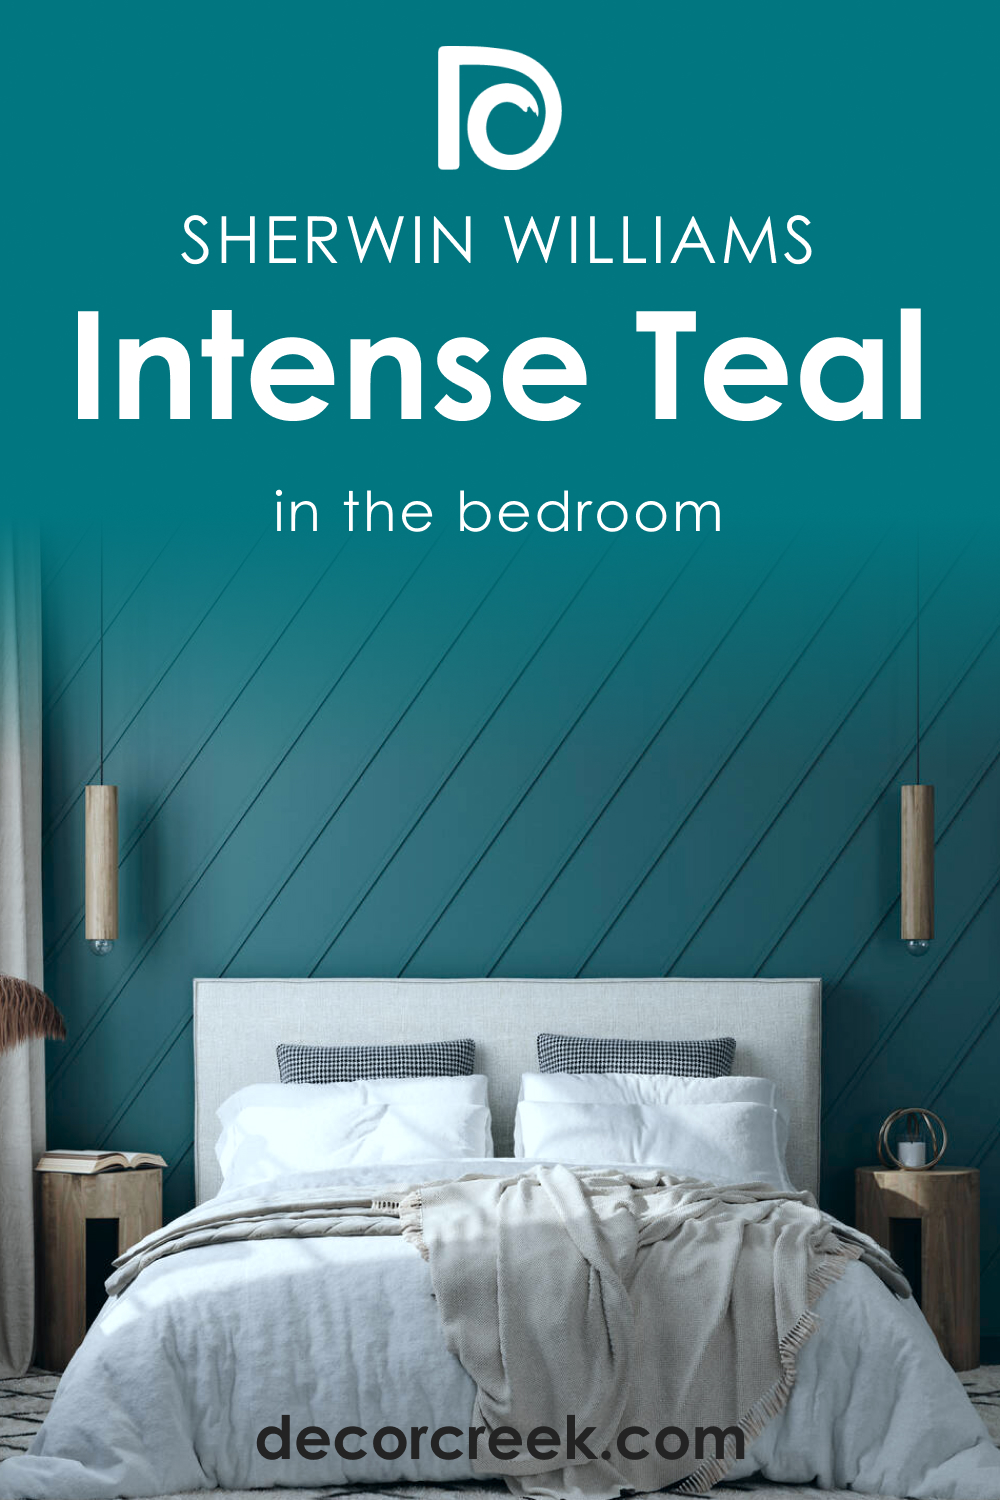 How to Use SW 6943 Intense Teal in the Bedroom?